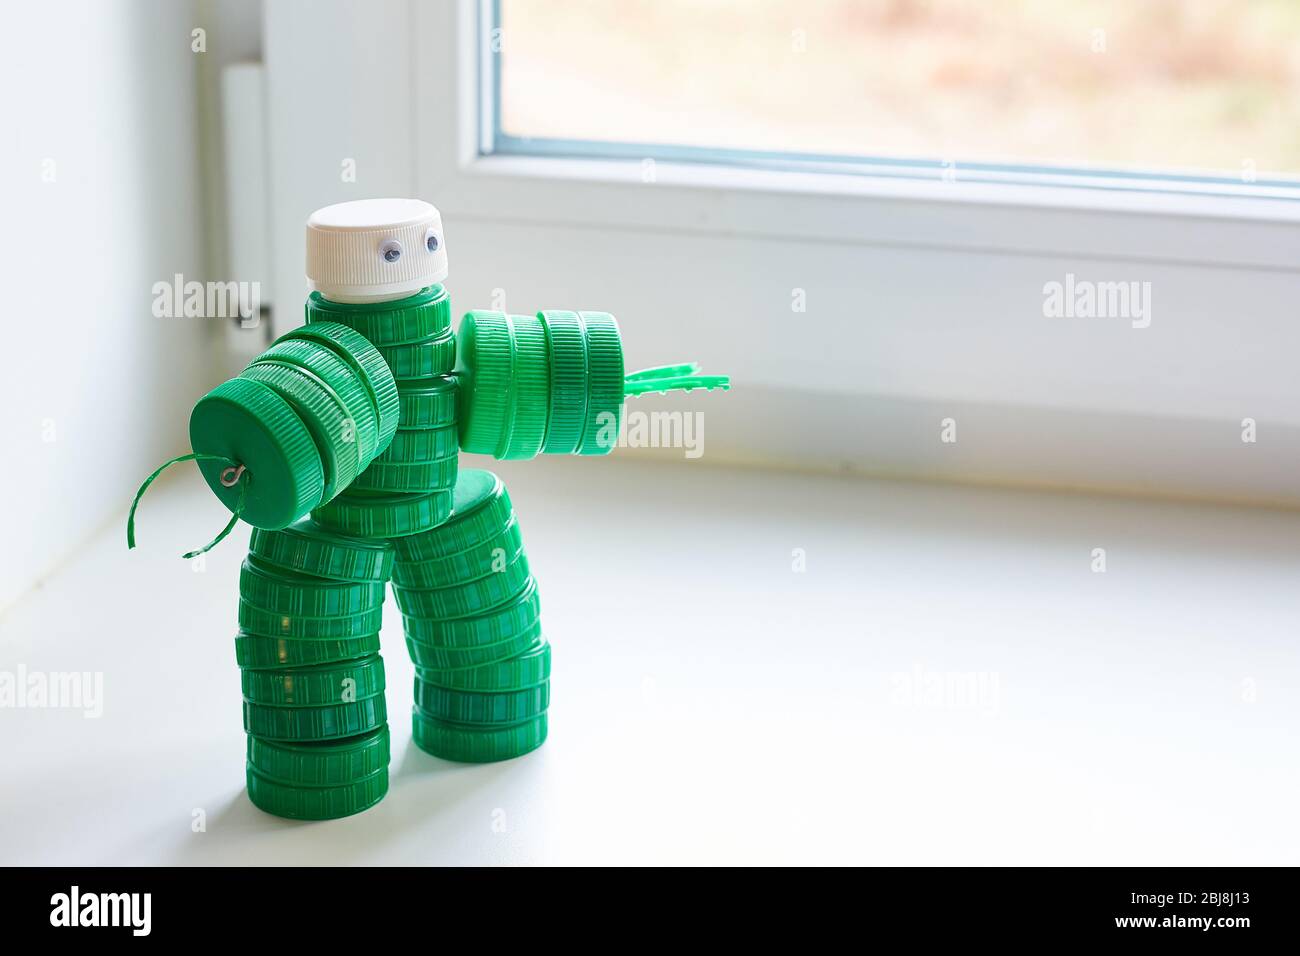 Recycling art. Zero waste, the second life of things. Toy robot made of plastic caps on the window. copyspace. Stock Photo